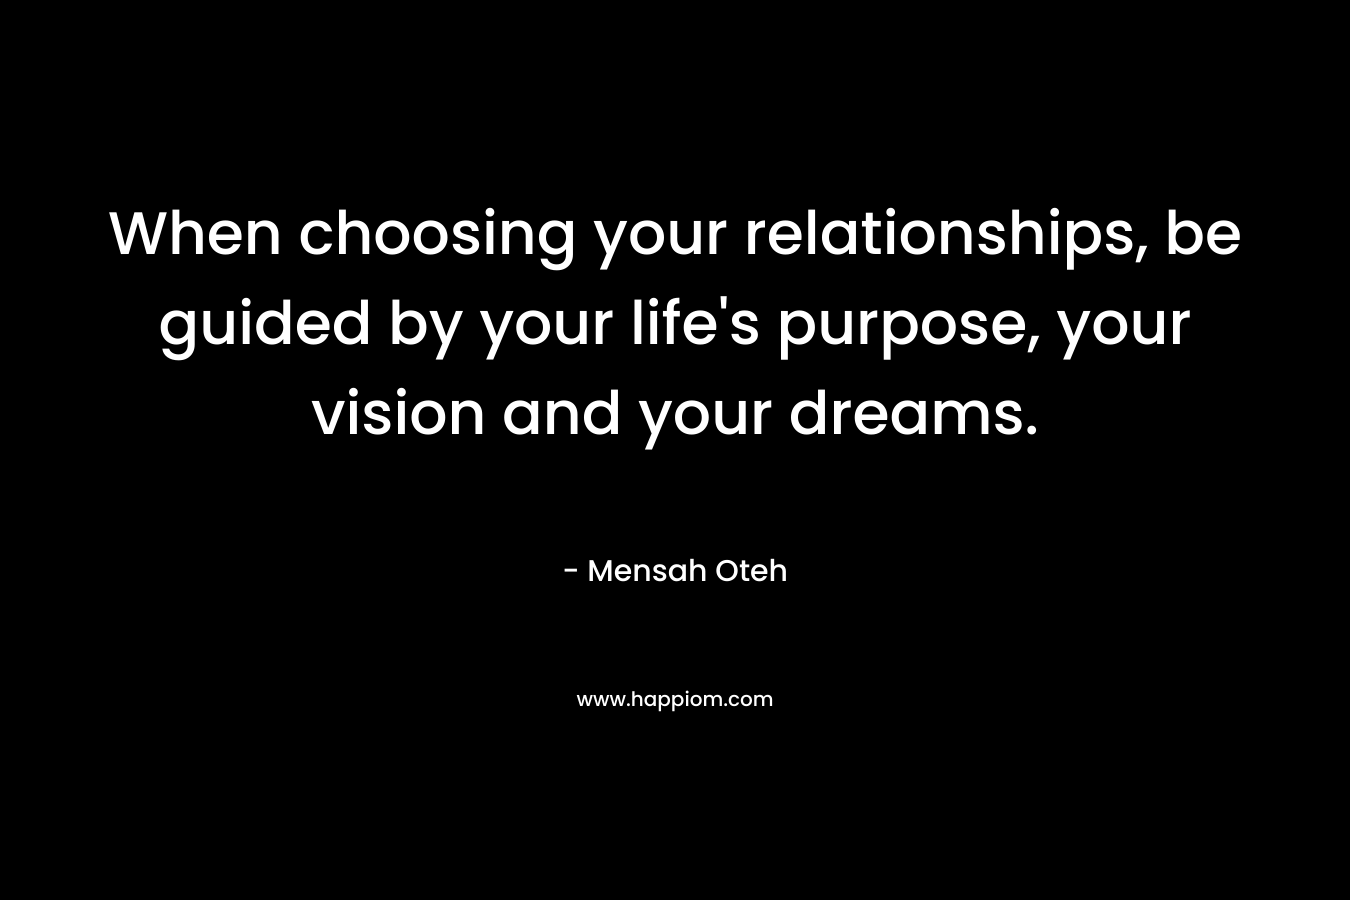 When choosing your relationships, be guided by your life’s purpose, your vision and your dreams. – Mensah Oteh